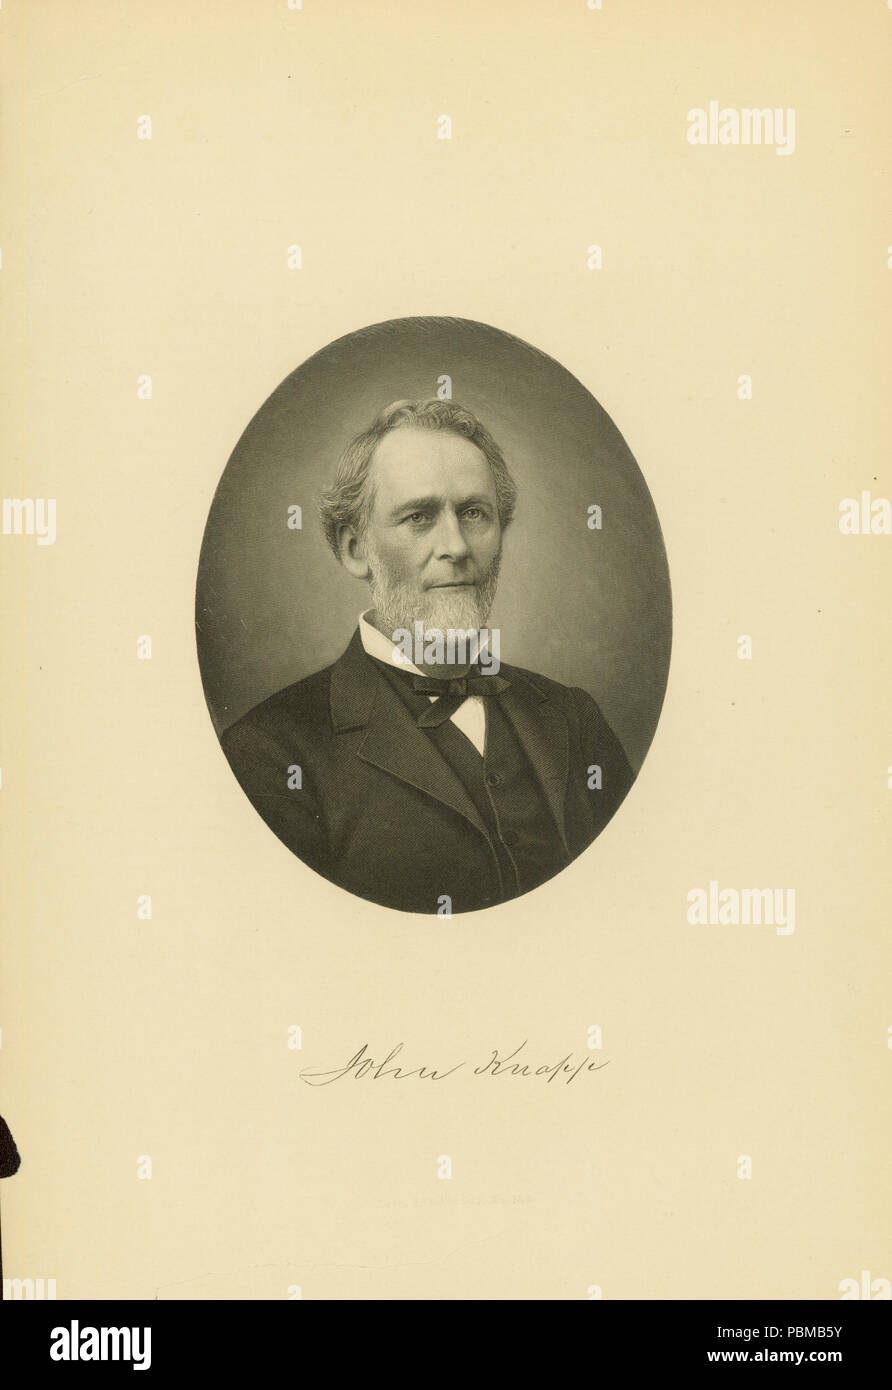 John Knapp. Steel engraving by unknown,  1883 Missouri History Museum Photograph and Print Collection. Portraits  n12686 838 John Knapp Stock Photo